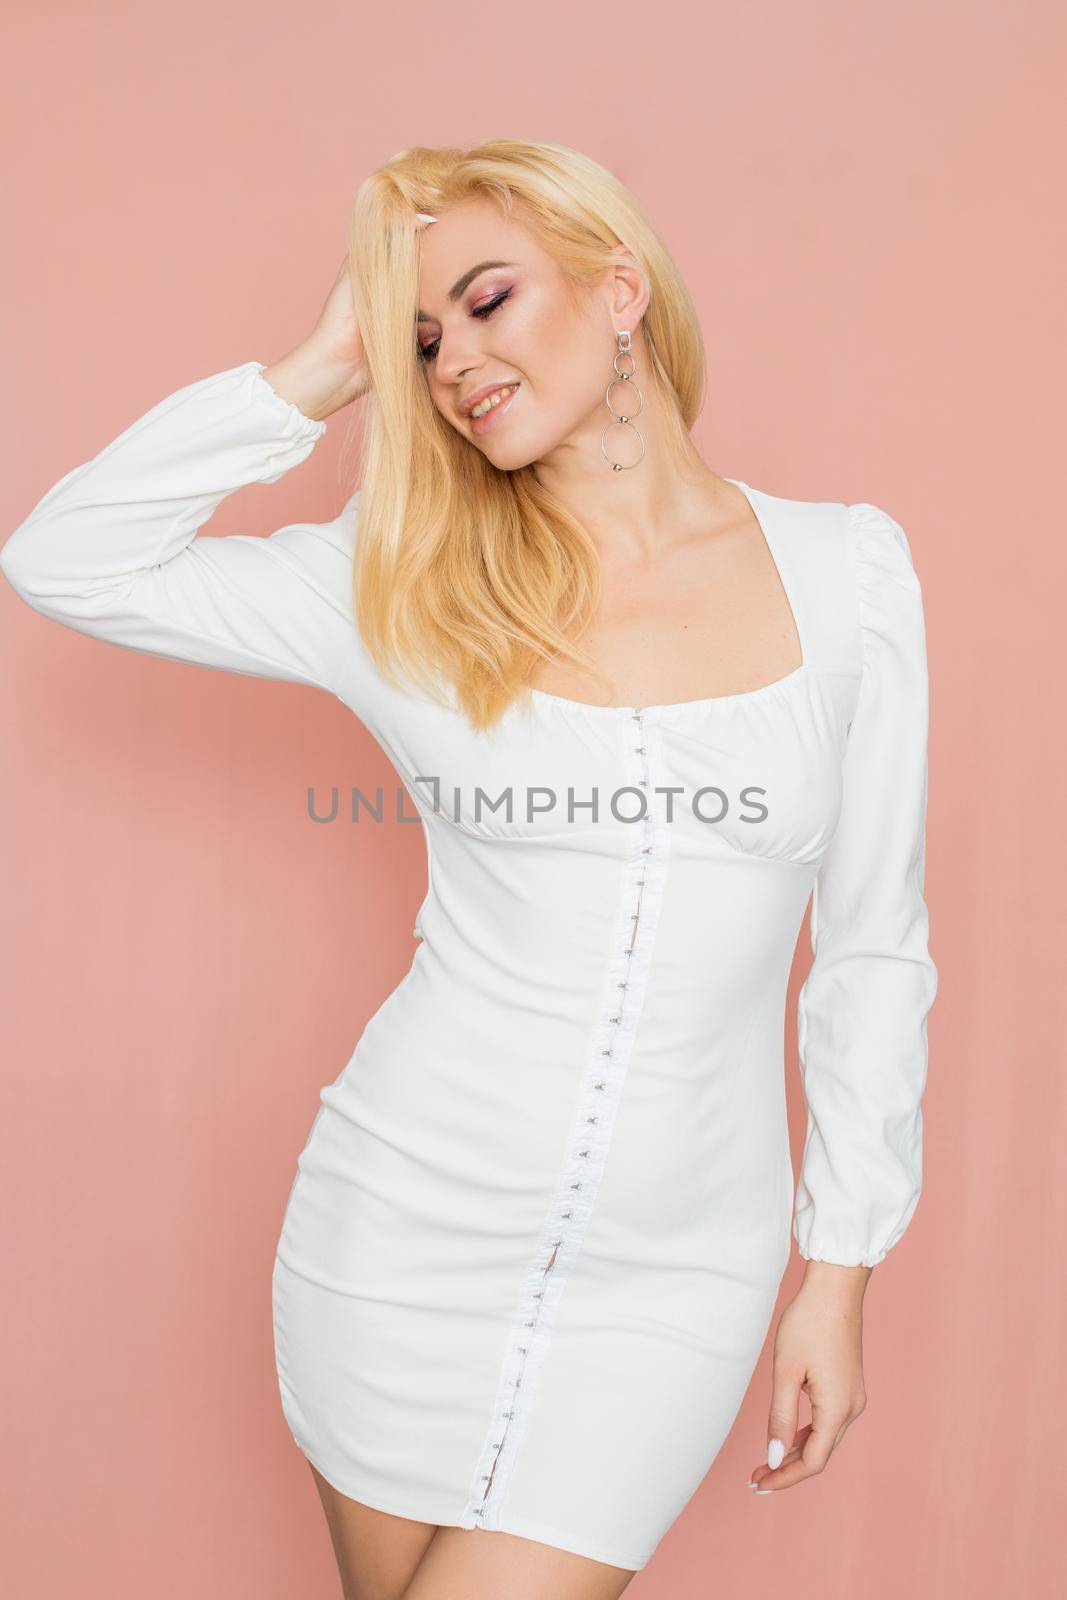 Spring fashion photo of blonde woman posing over pink background. Wearing white vintage dress with long sleeves